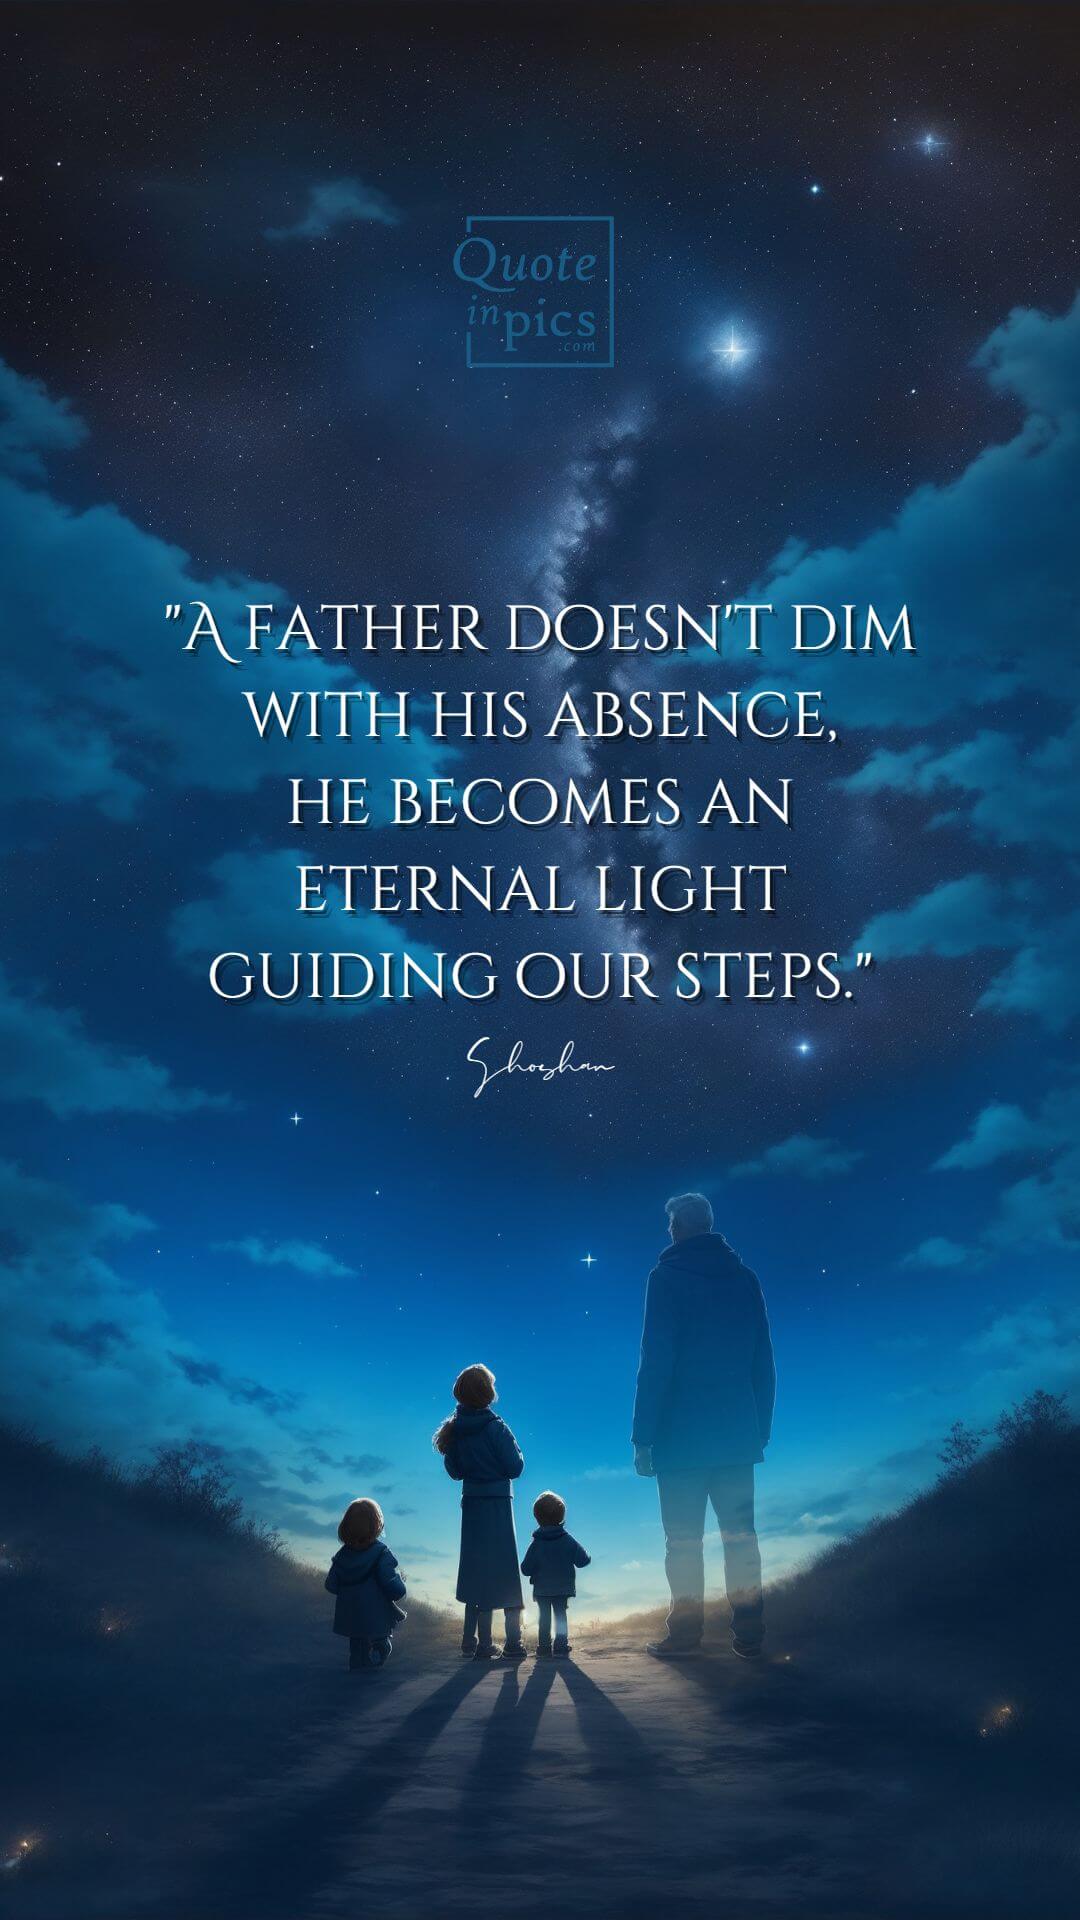 A father doesn't dim with his absence, he becomes an eternal light guiding our steps.